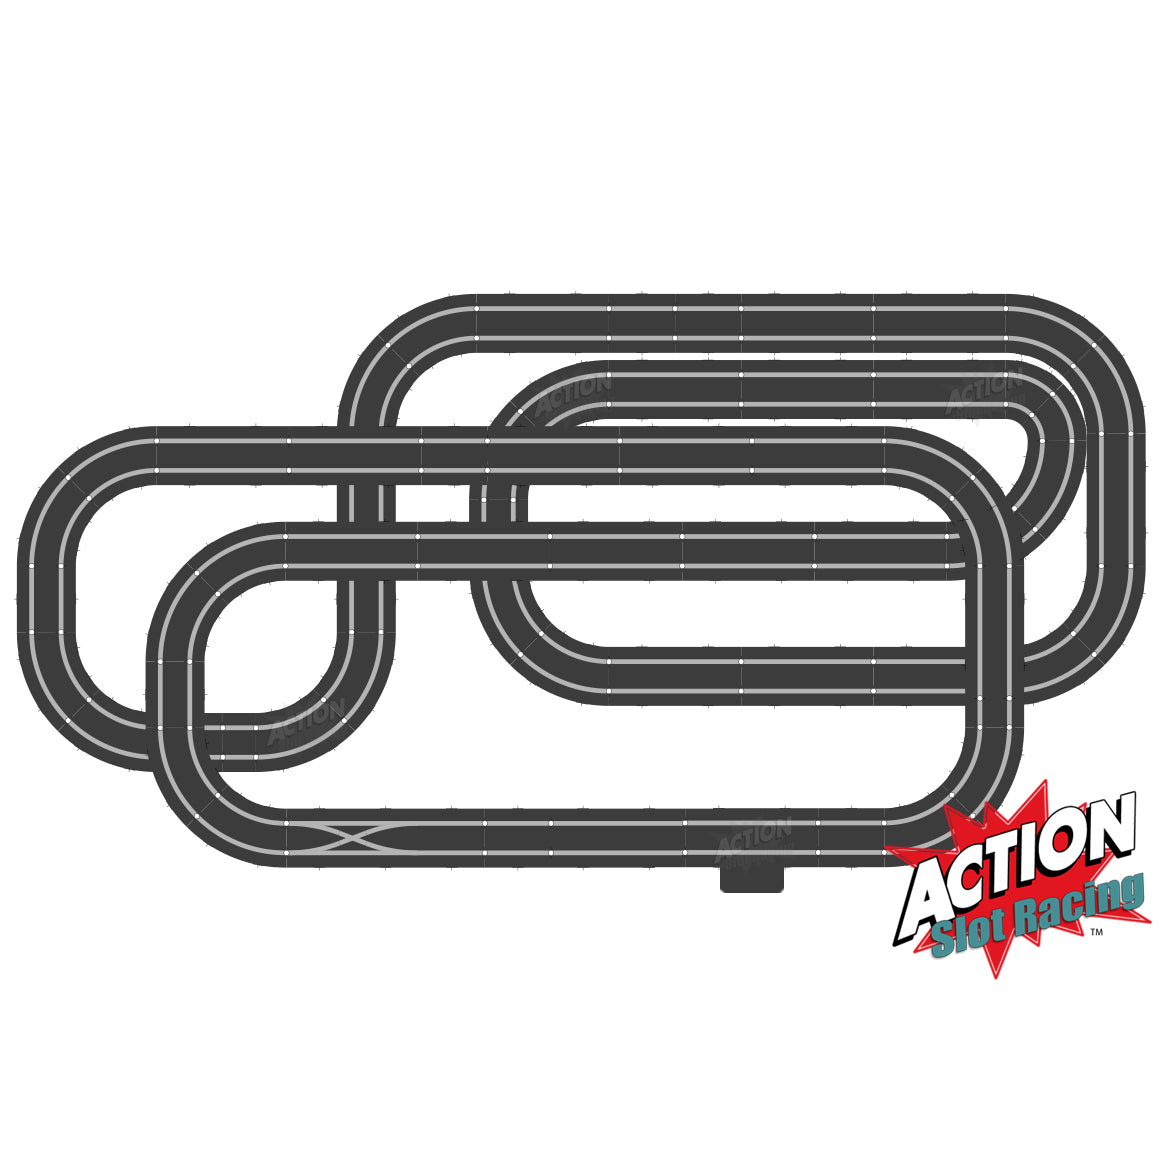 Scalextric Sport 1:32 Track Set Layout - ARC Pro #AS7